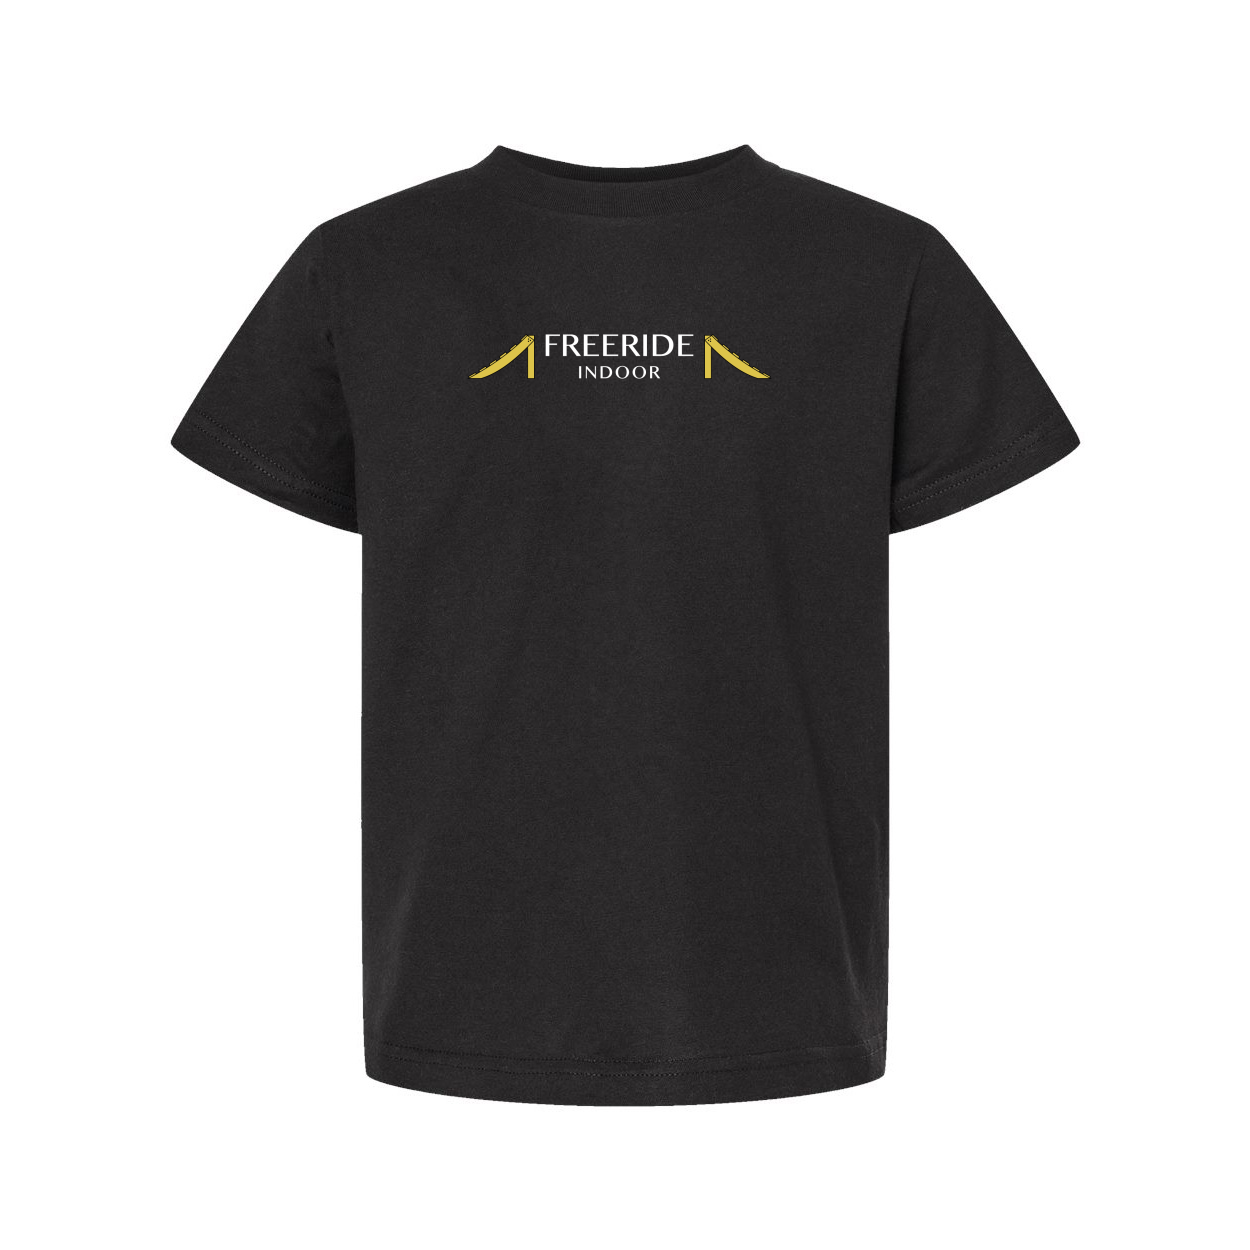 Freeride Indoor Classic Youth T-Shirt Black